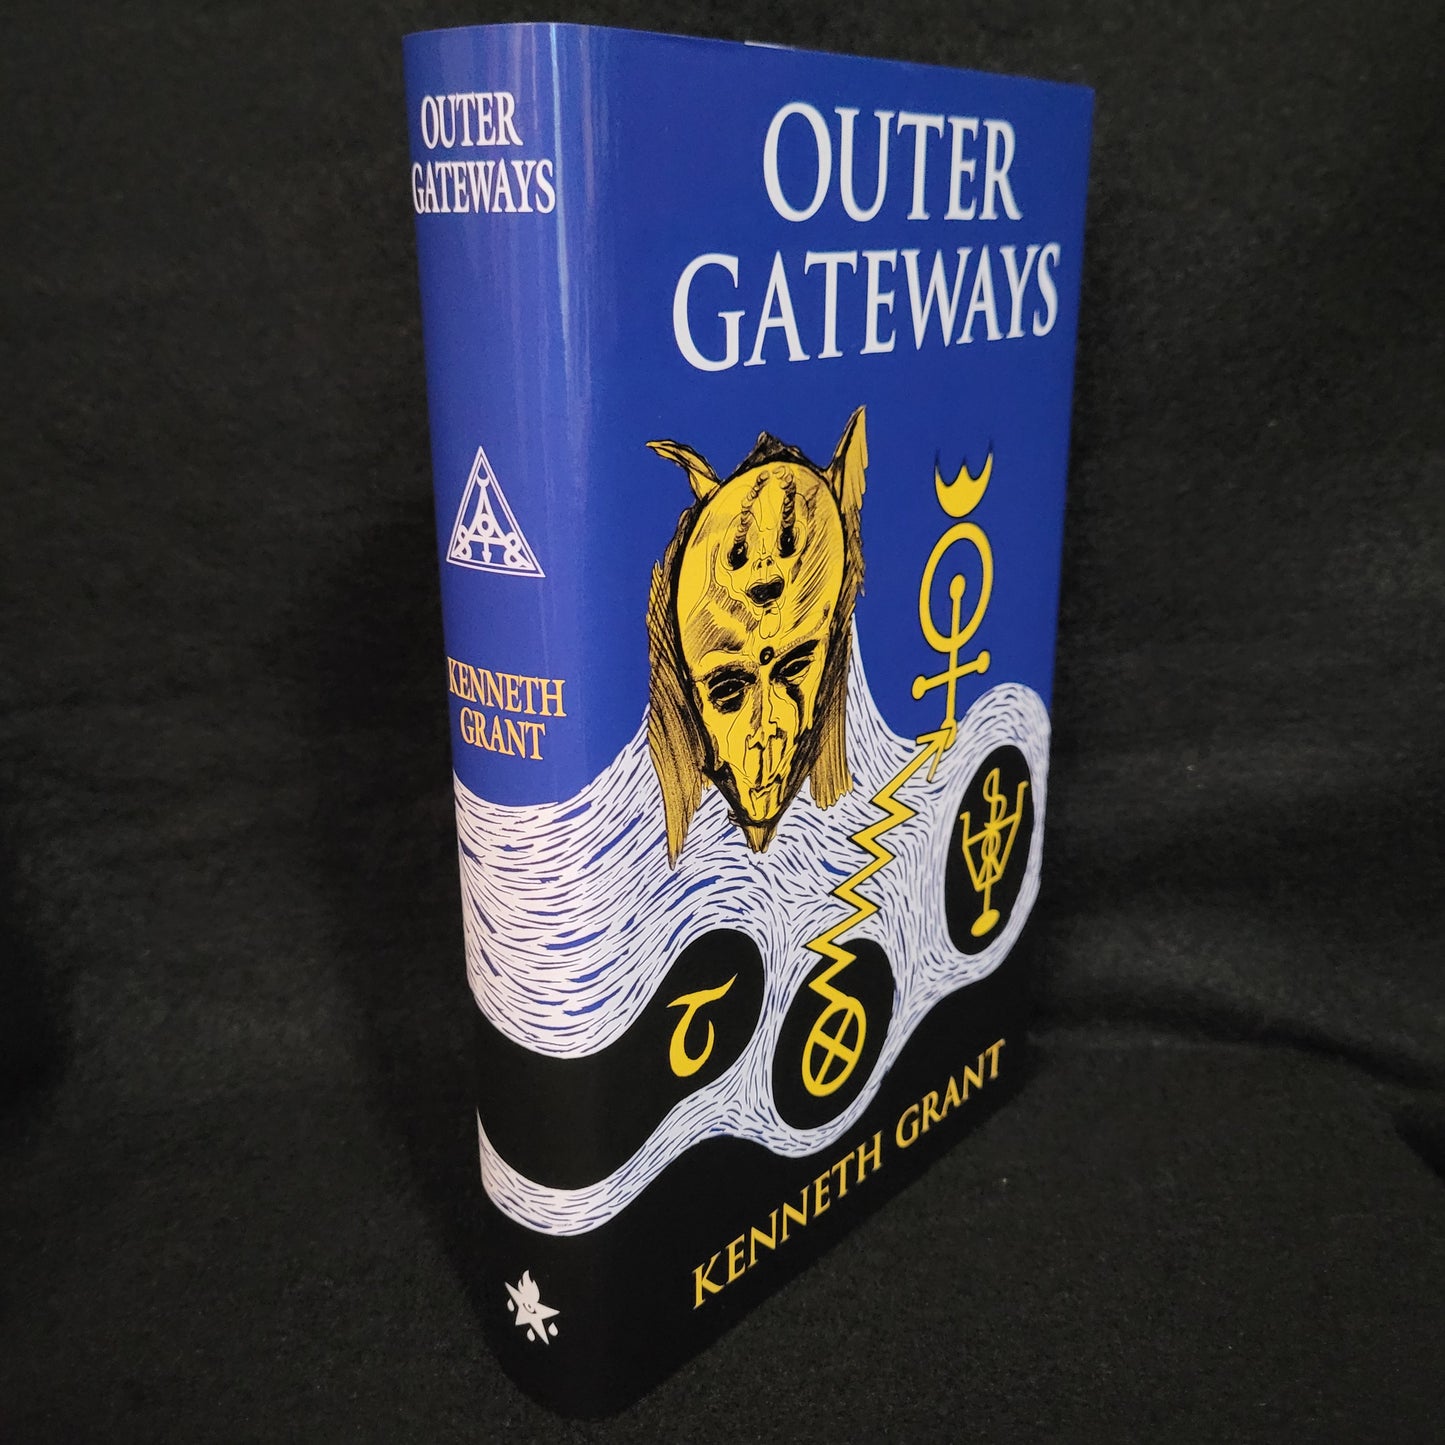 Outer Gateways by Kenneth Grant Enhanced Hardcover Edition (Starfire Publishing, 2015)